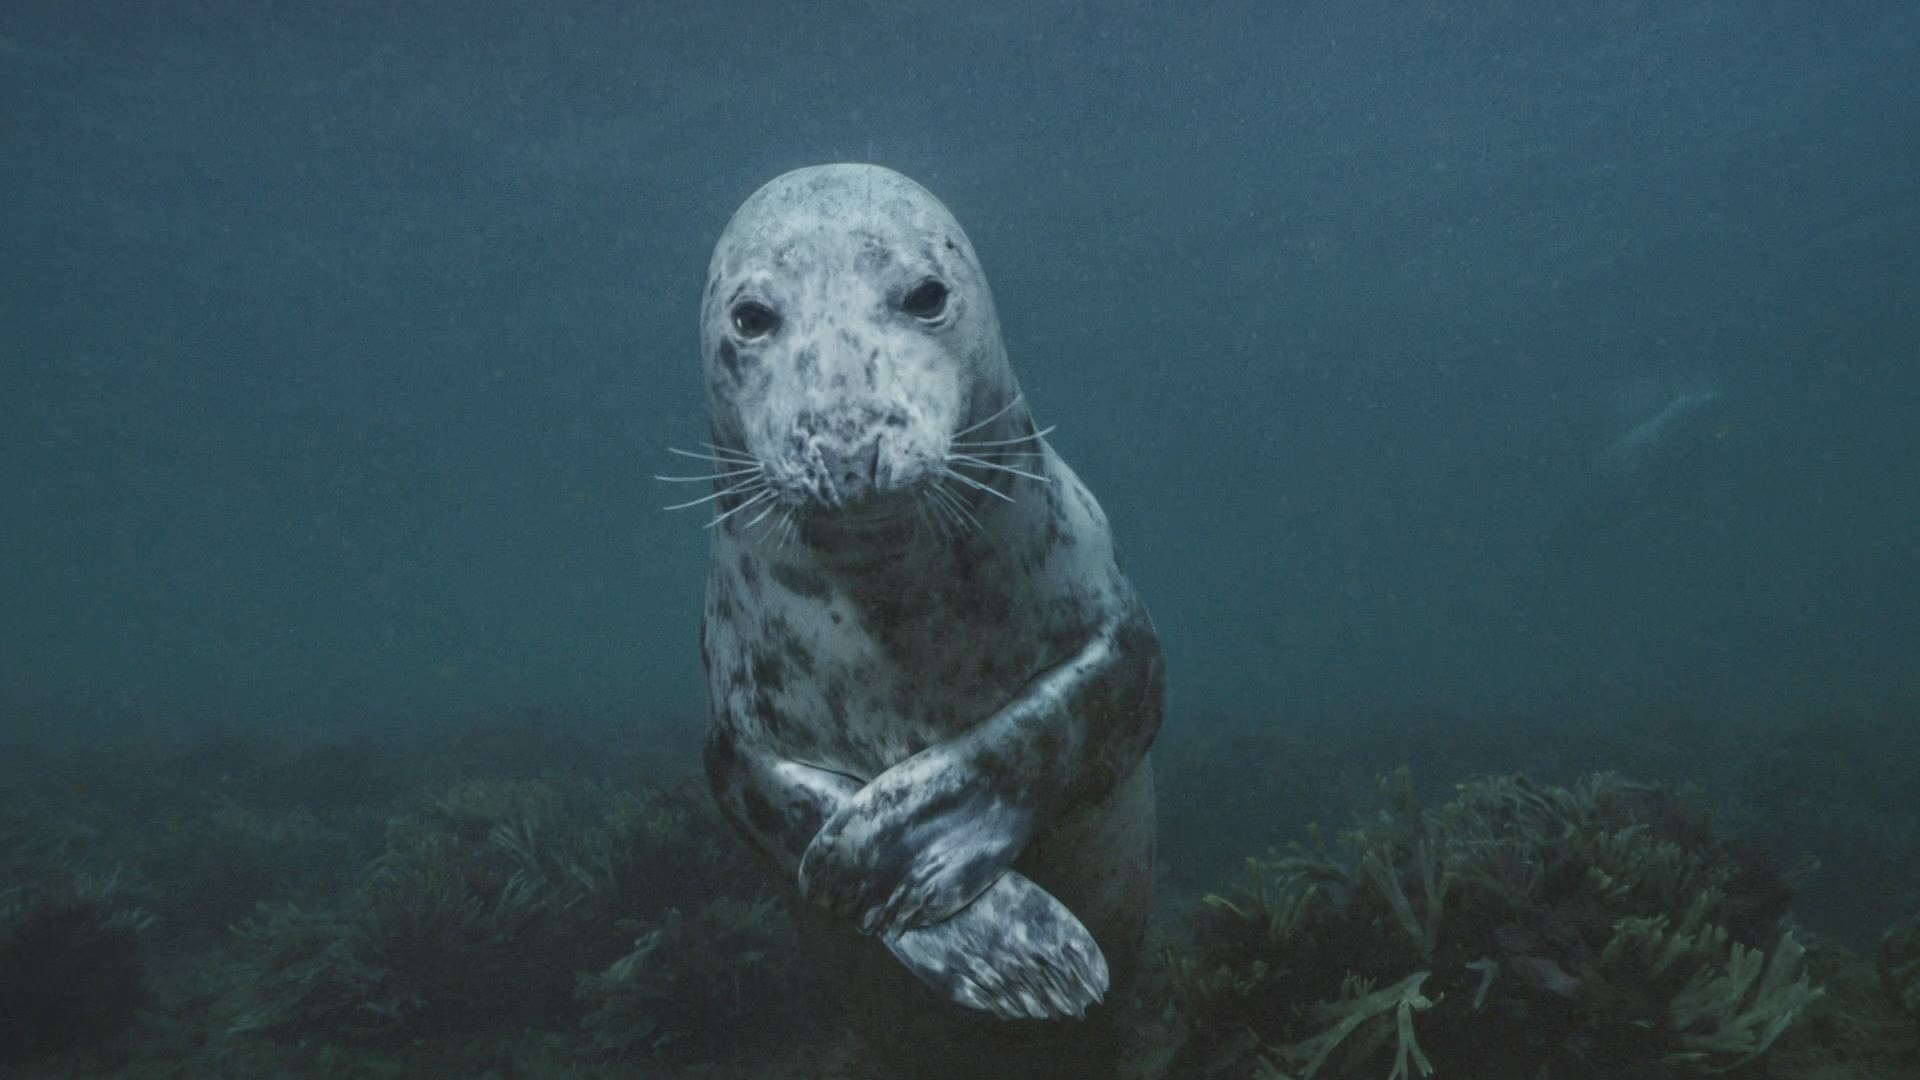 Mainer Brian Skerry has spent his career capturing underwater images for National Geographics.